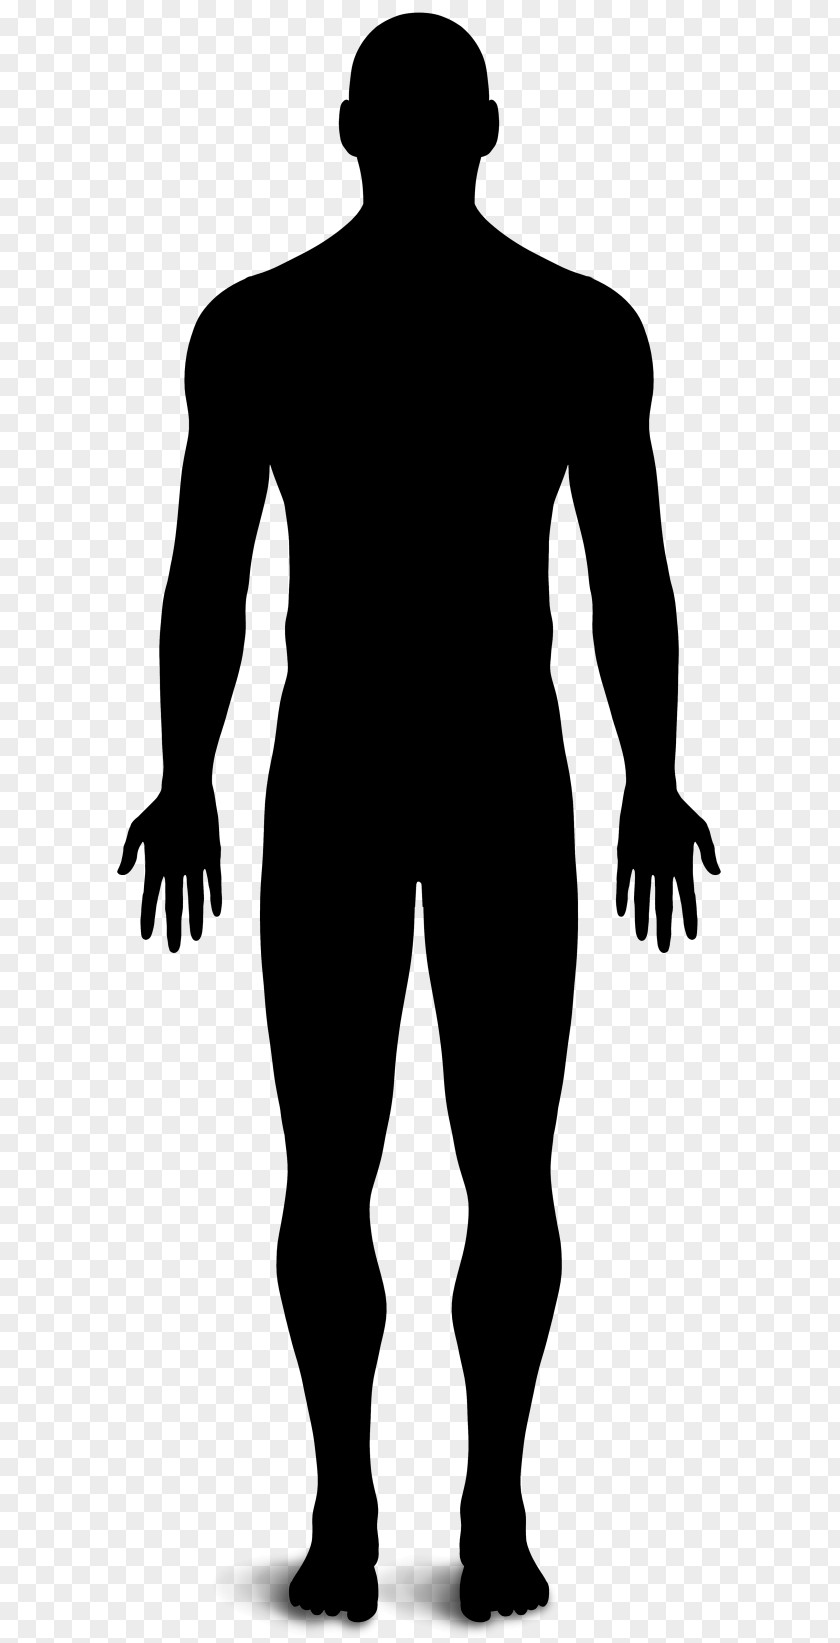 Bigfoot Drawing Sketch Silhouette Illustration PNG